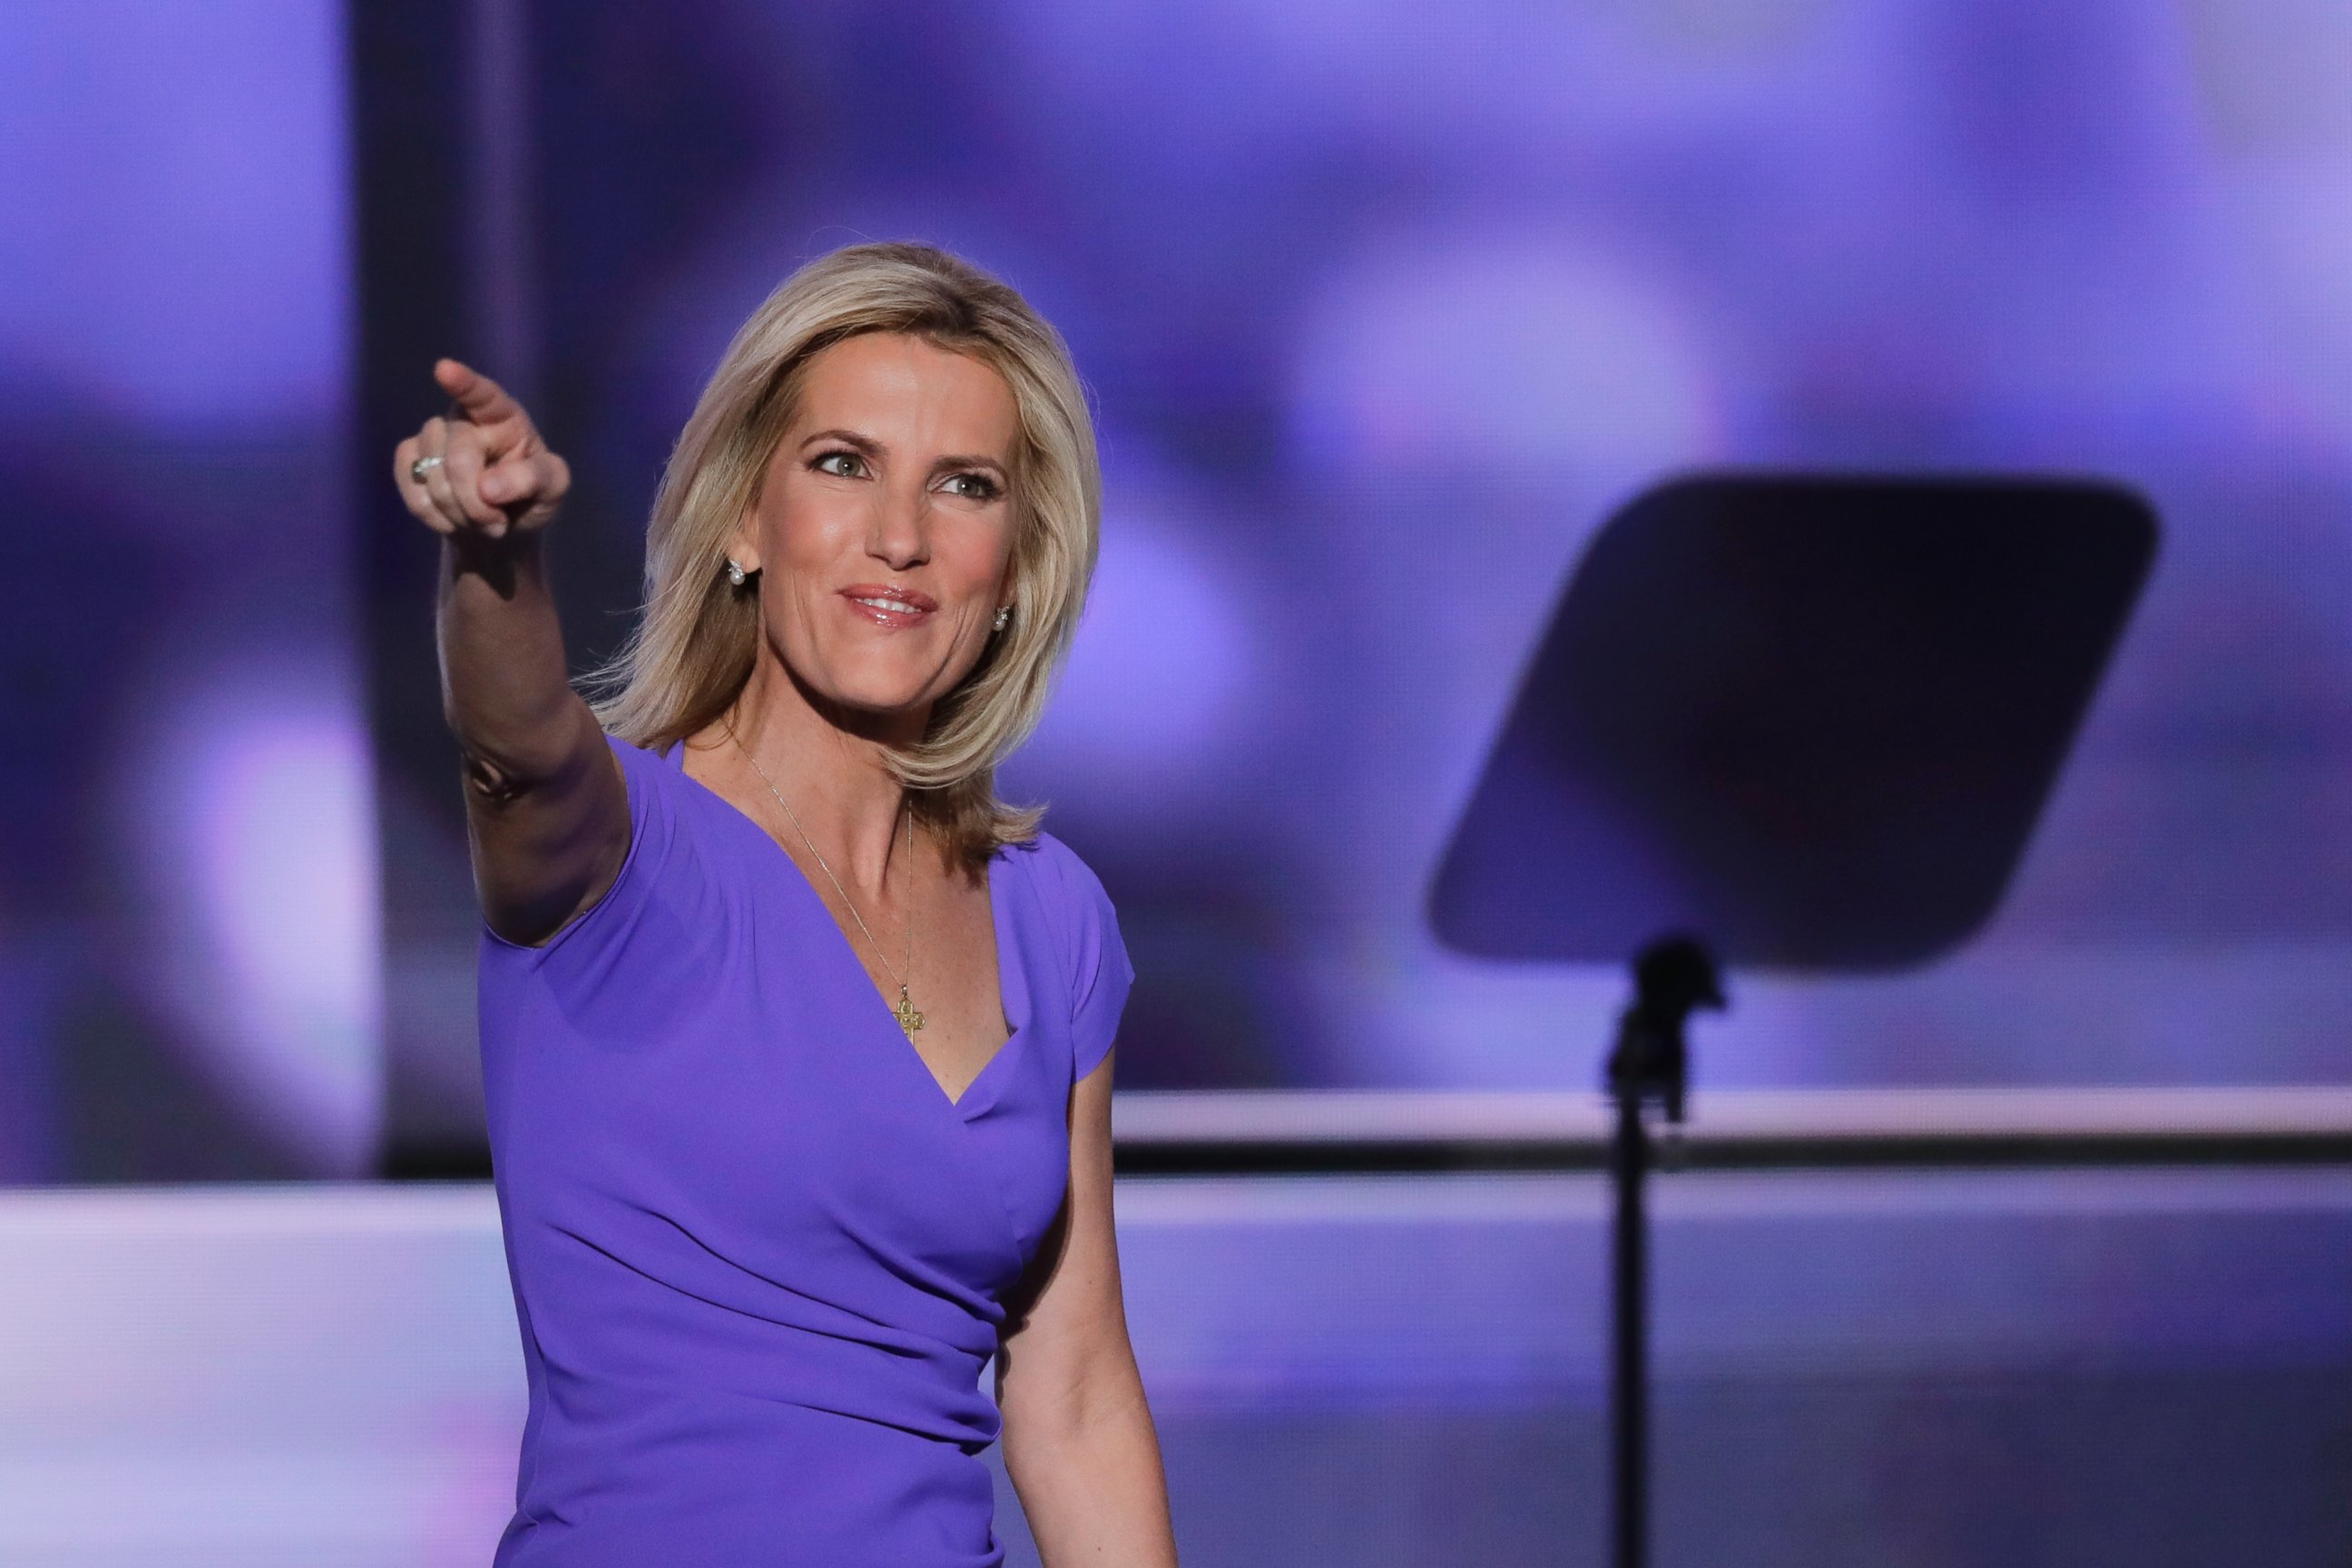 PHOTO: Conservative political commentator Laura Ingraham walks on stage during the third day of the Republican National Convention in Cleveland, Ohio, July 20, 2016. 